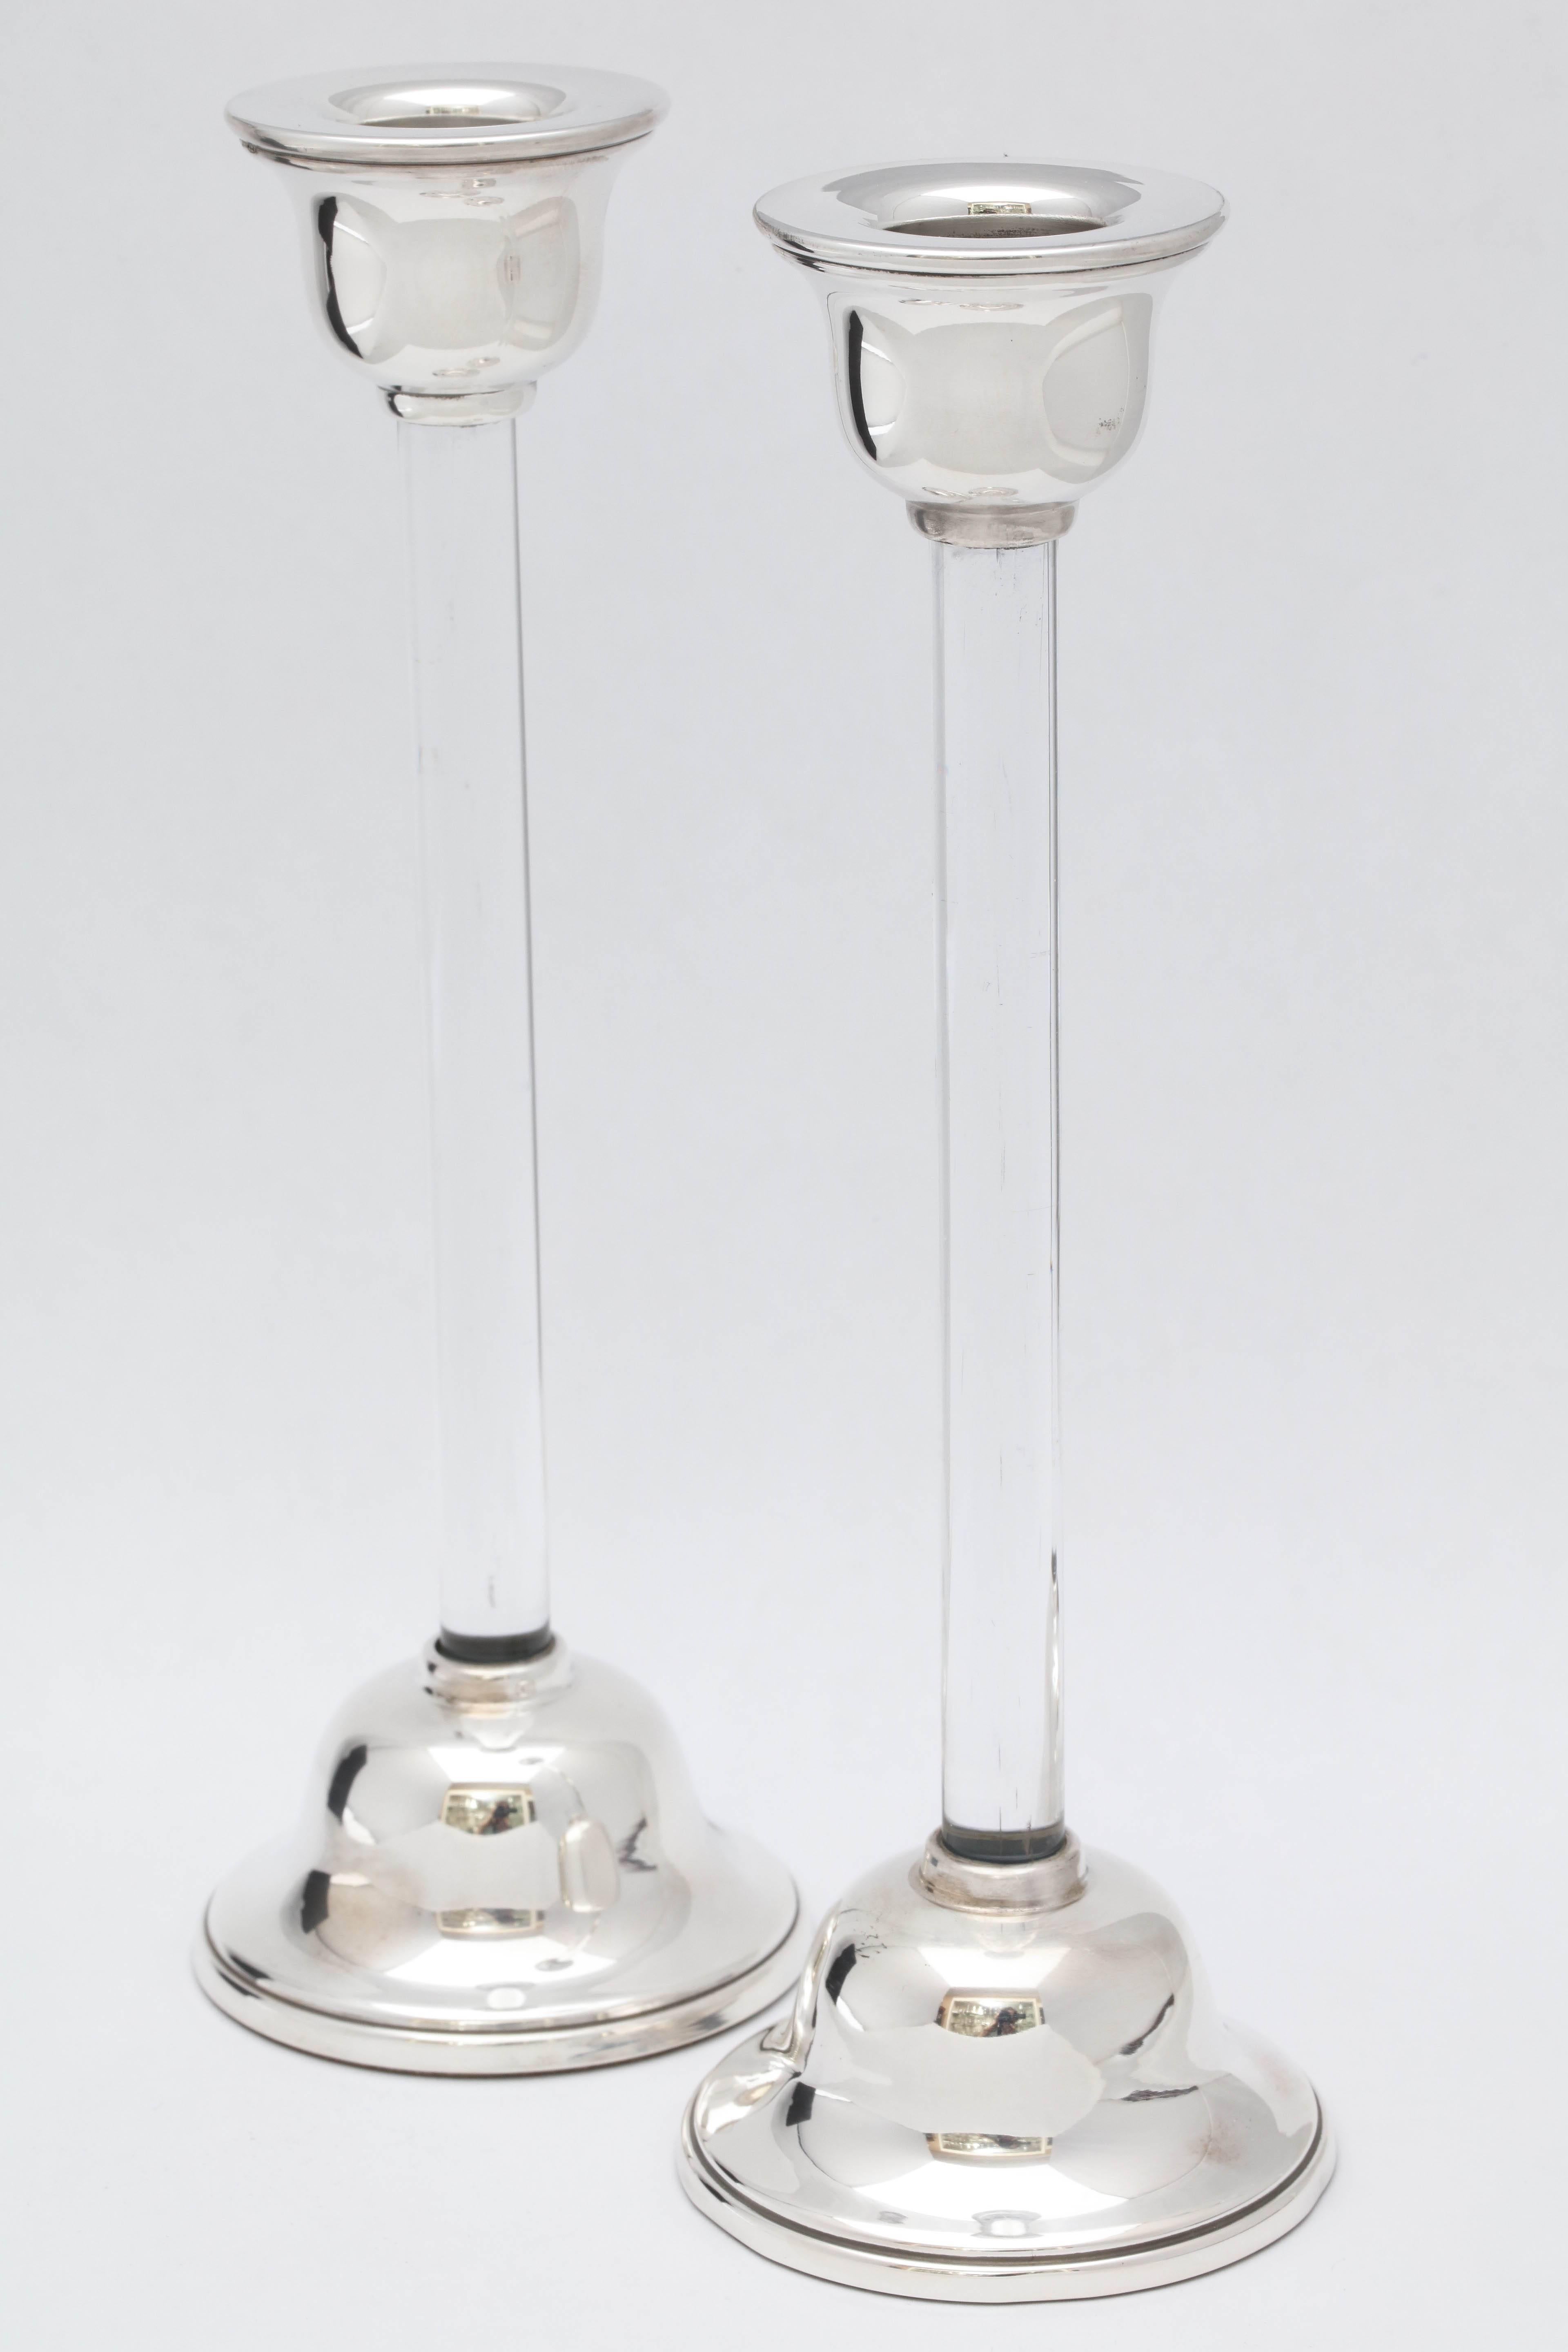 European Pair of Mid-Century Modern Sterling Silver-Mounted Crystal Candlesticks